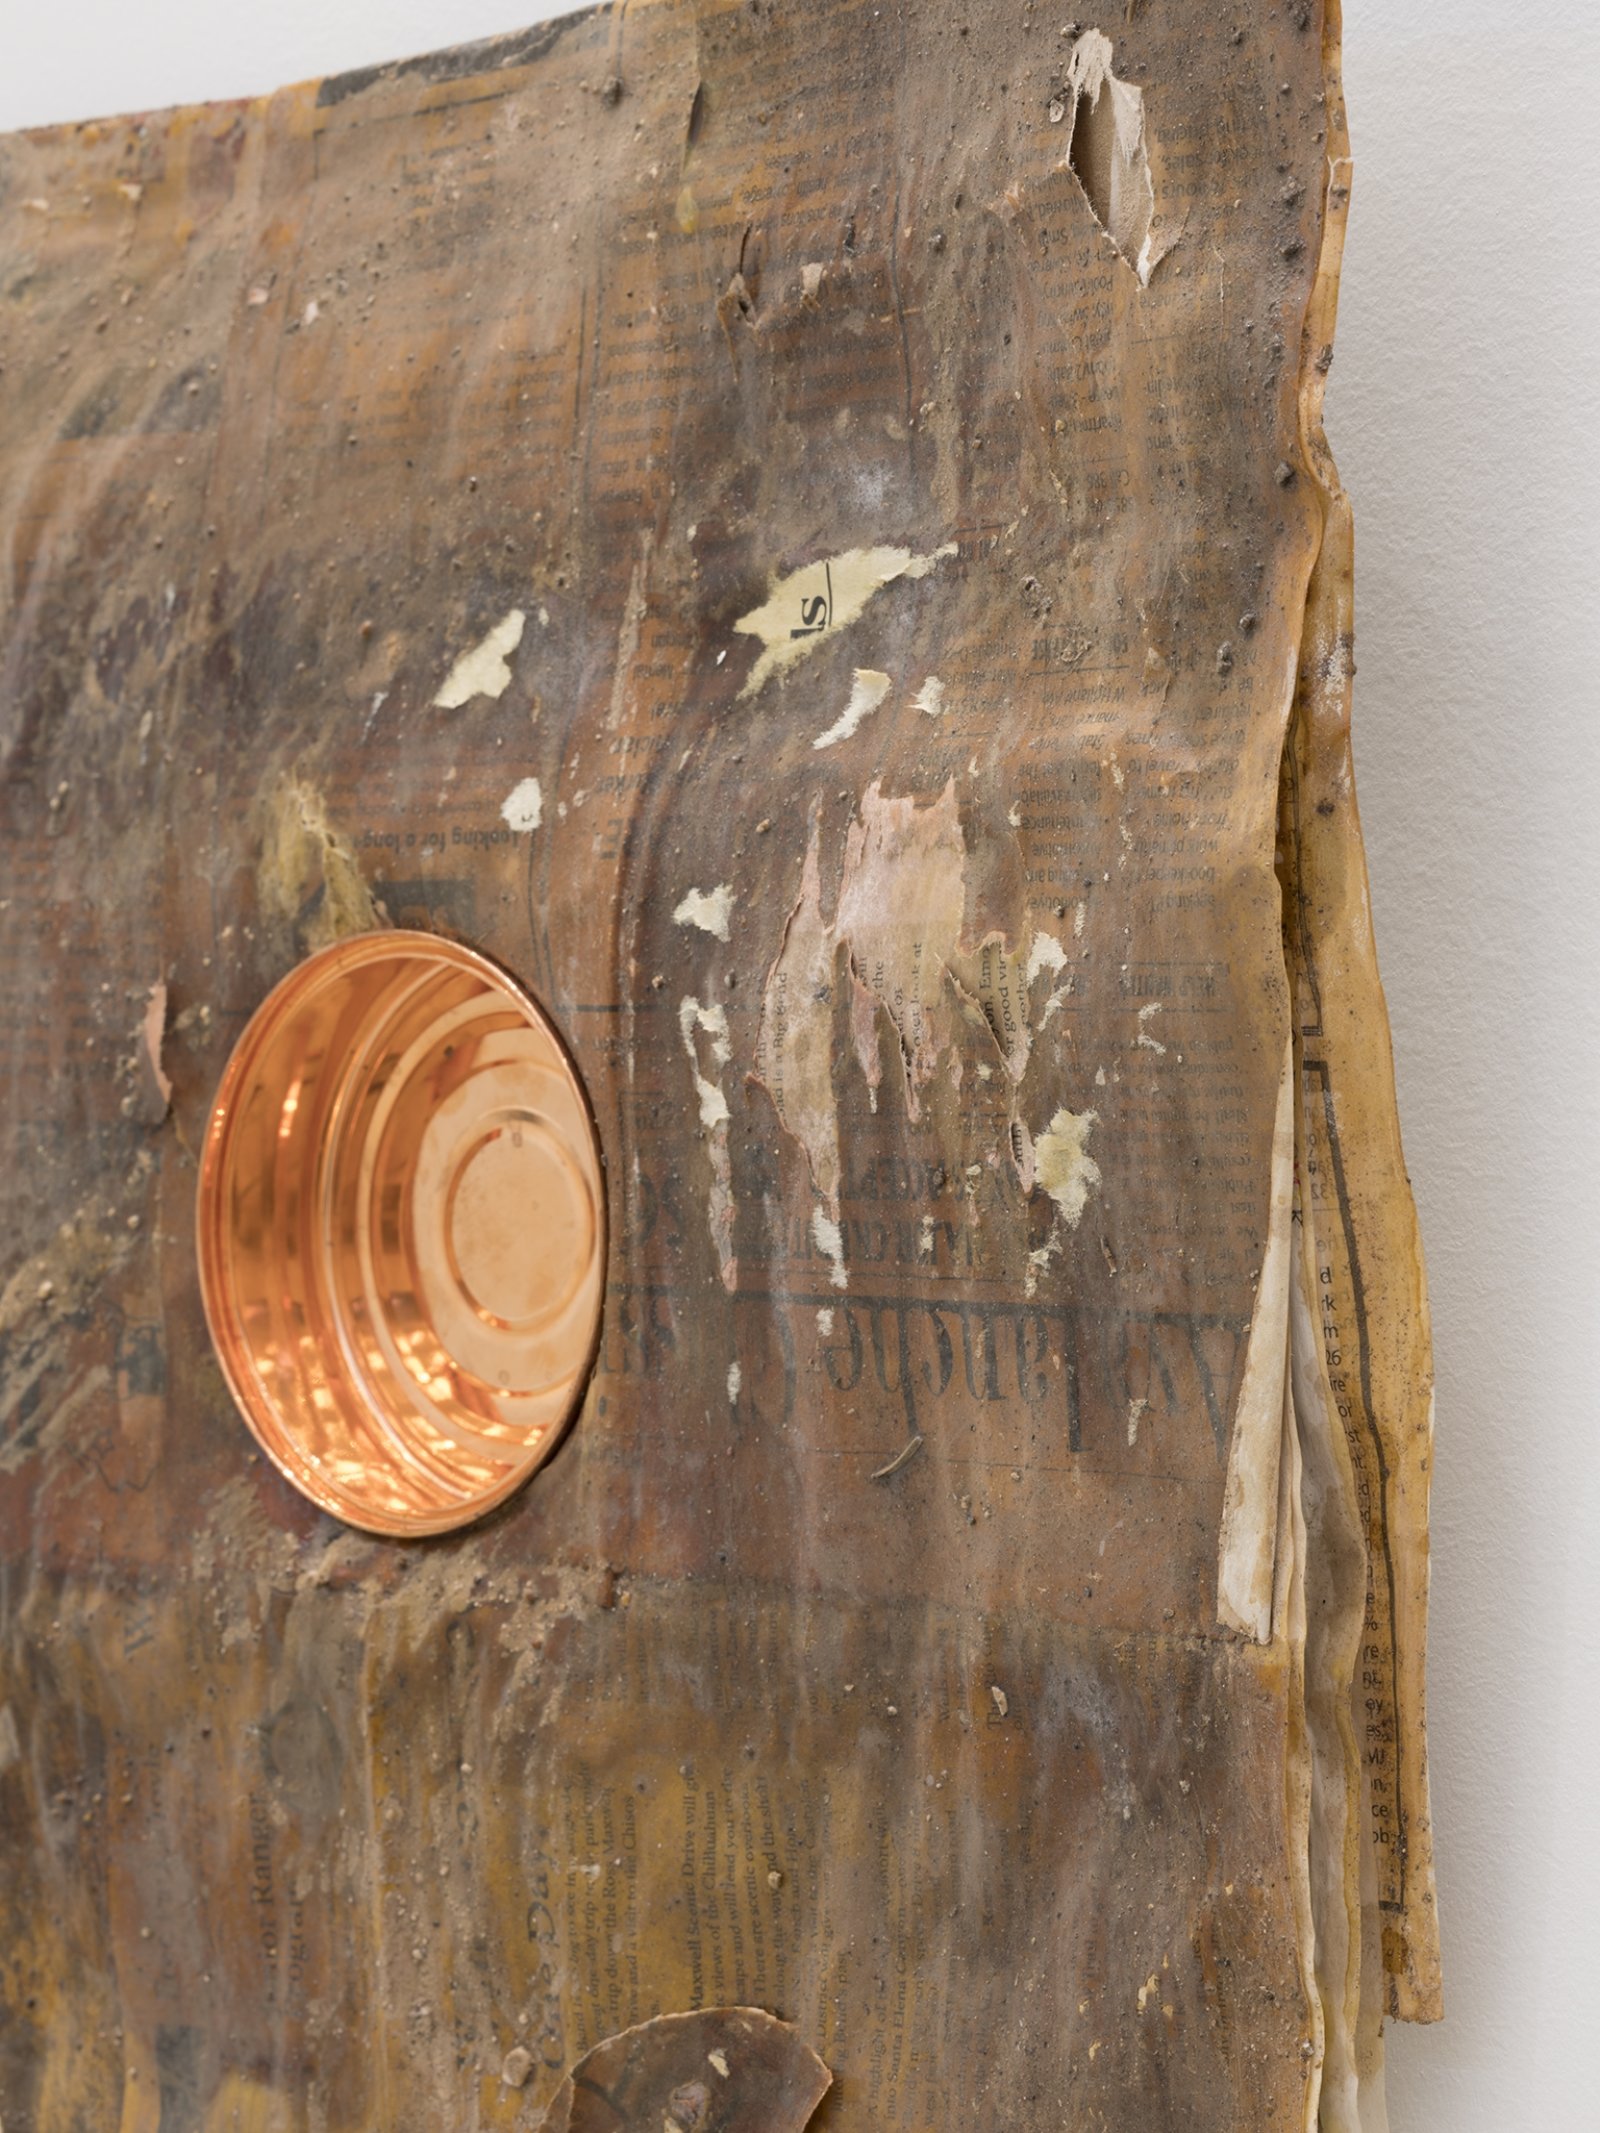 Rochelle Goldberg, Dirty Wall (detail), 2019, newsprint, shellac, copperplated can, dirt from the river, 16 x 18 in. (41 x 45 cm)